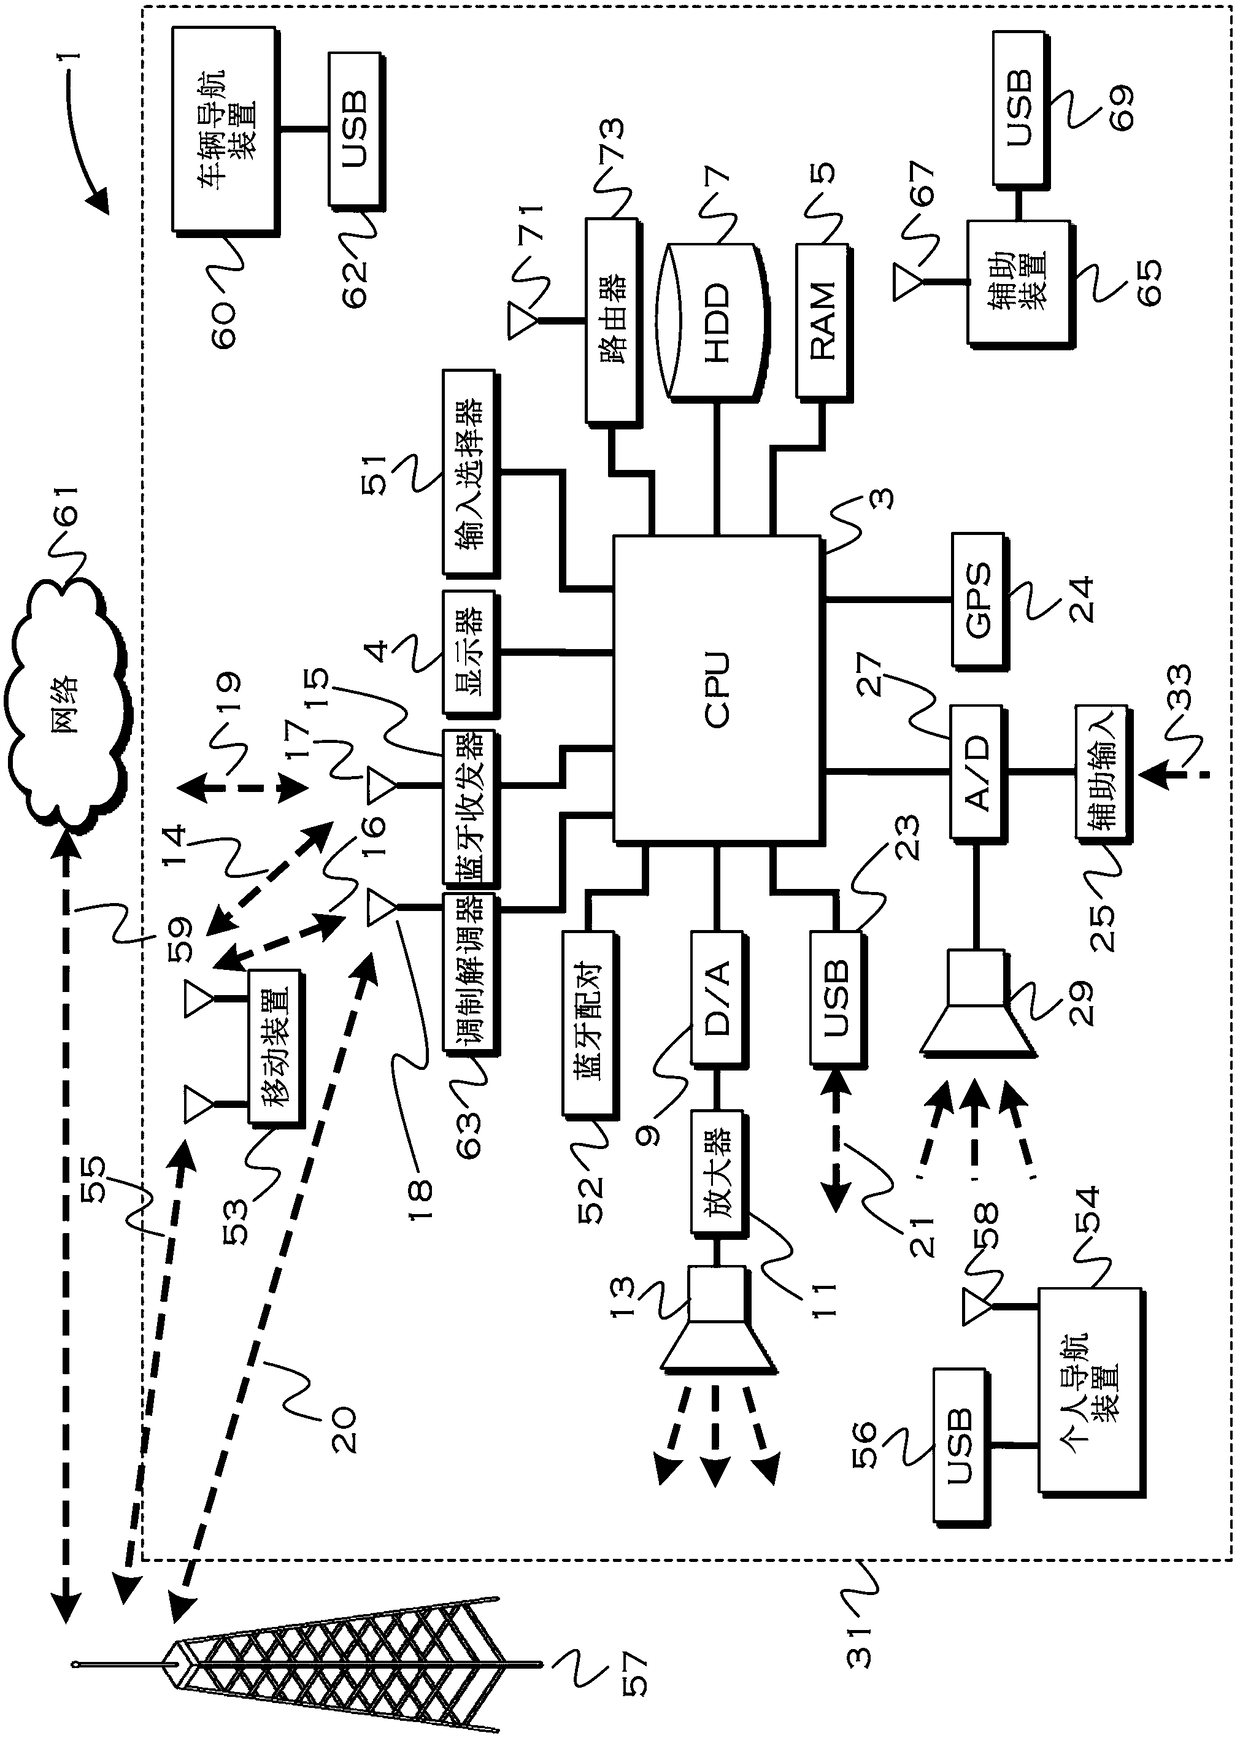 Method and apparatus for behavior-based vehicle purchase recommendations